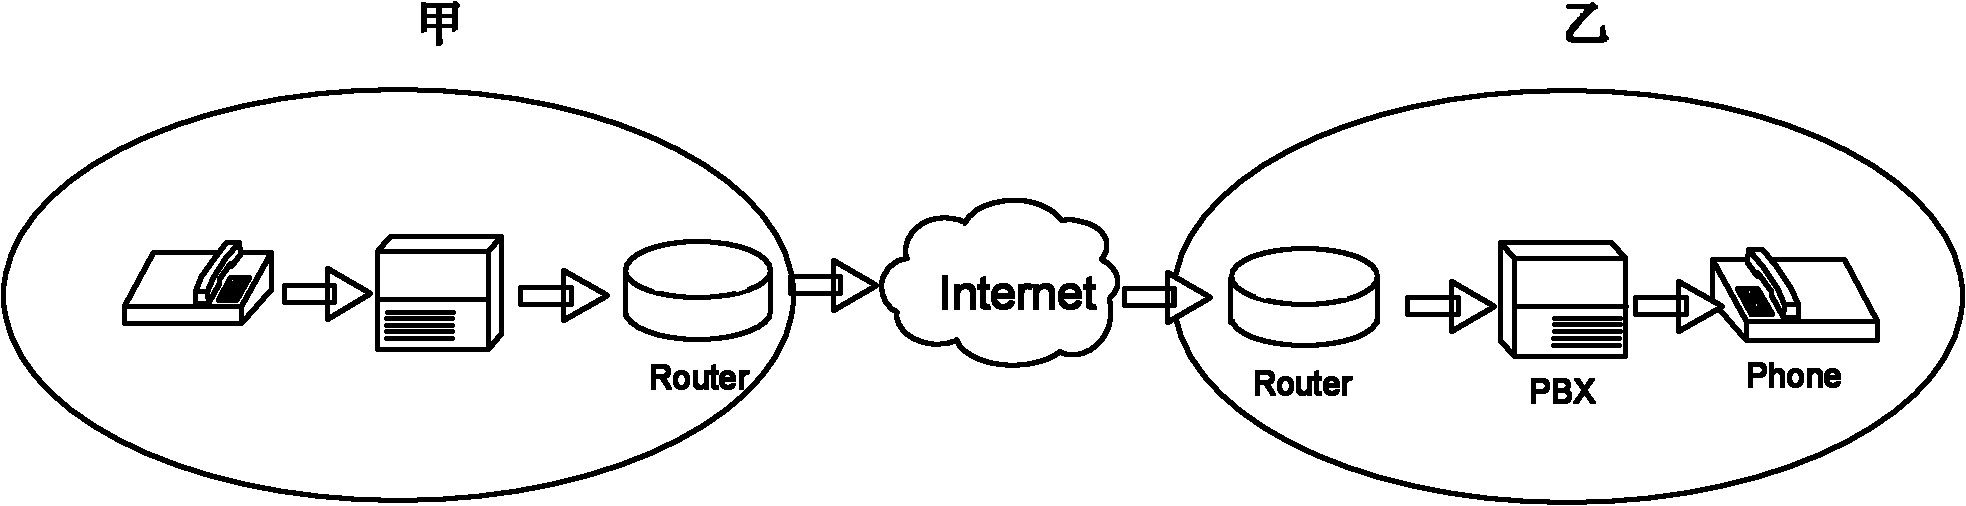 Method for realizing enterprise voice over internet phone (VOIP) immediate call